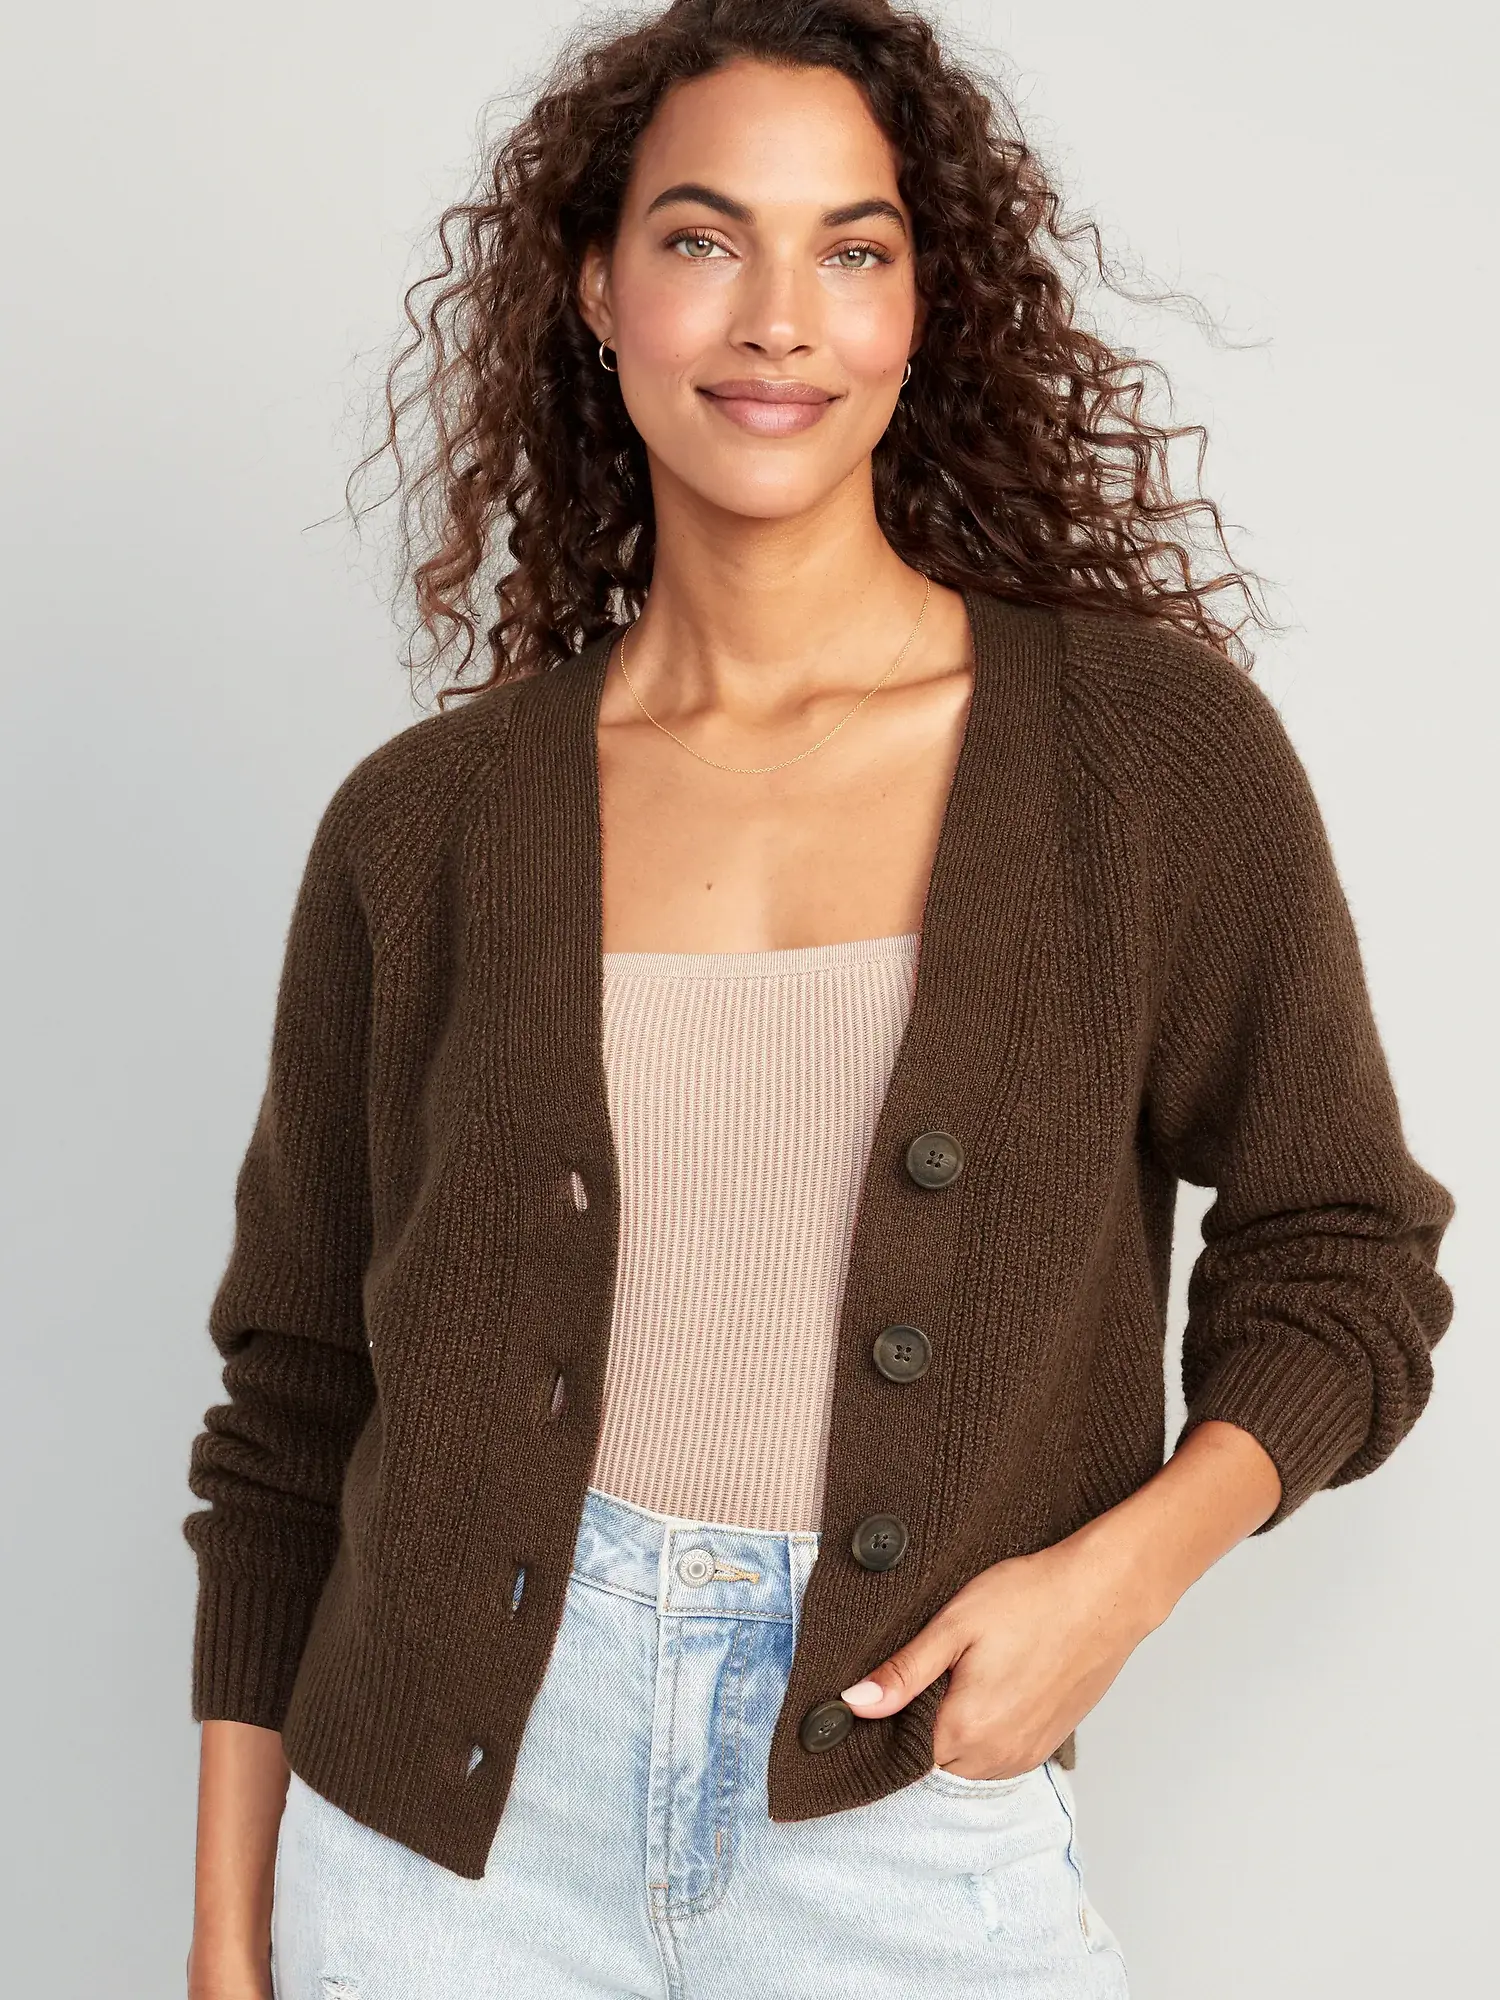 Old Navy Shaker-Stitch Cardigan Sweater for Women brown. 1